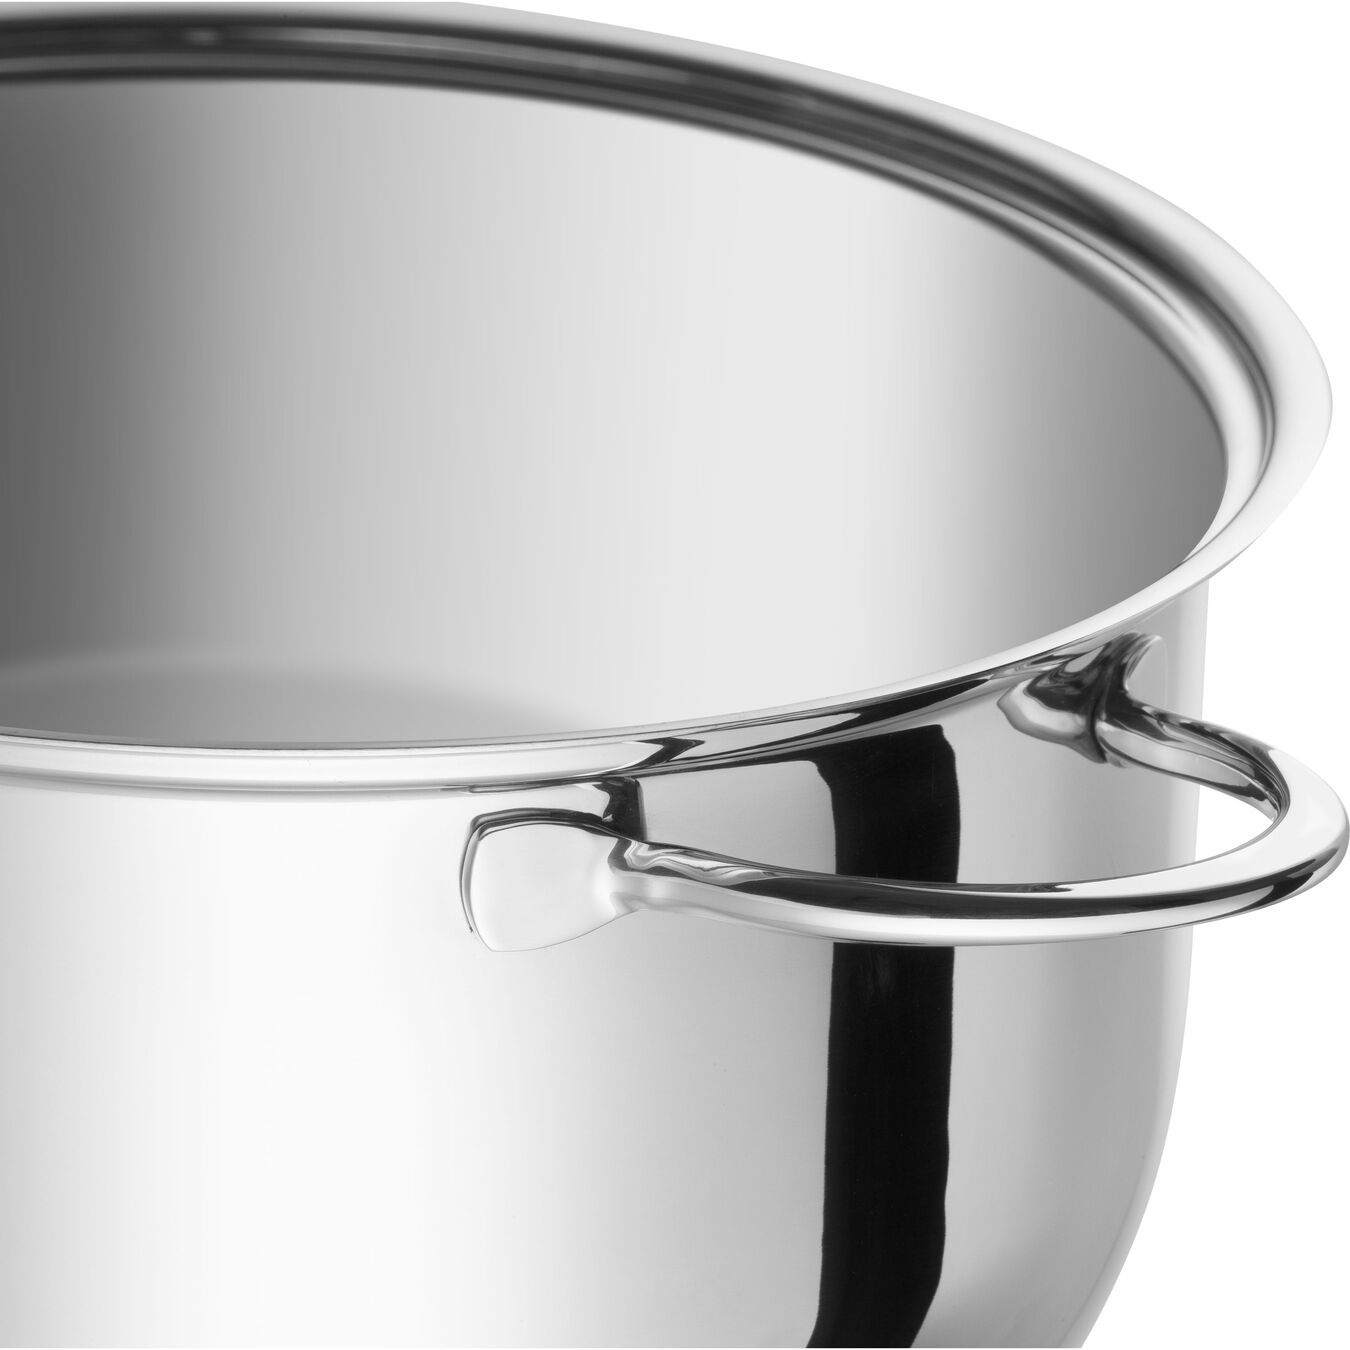 38 cm 18/10 Stainless Steel oval Roaster, silver,,large 5